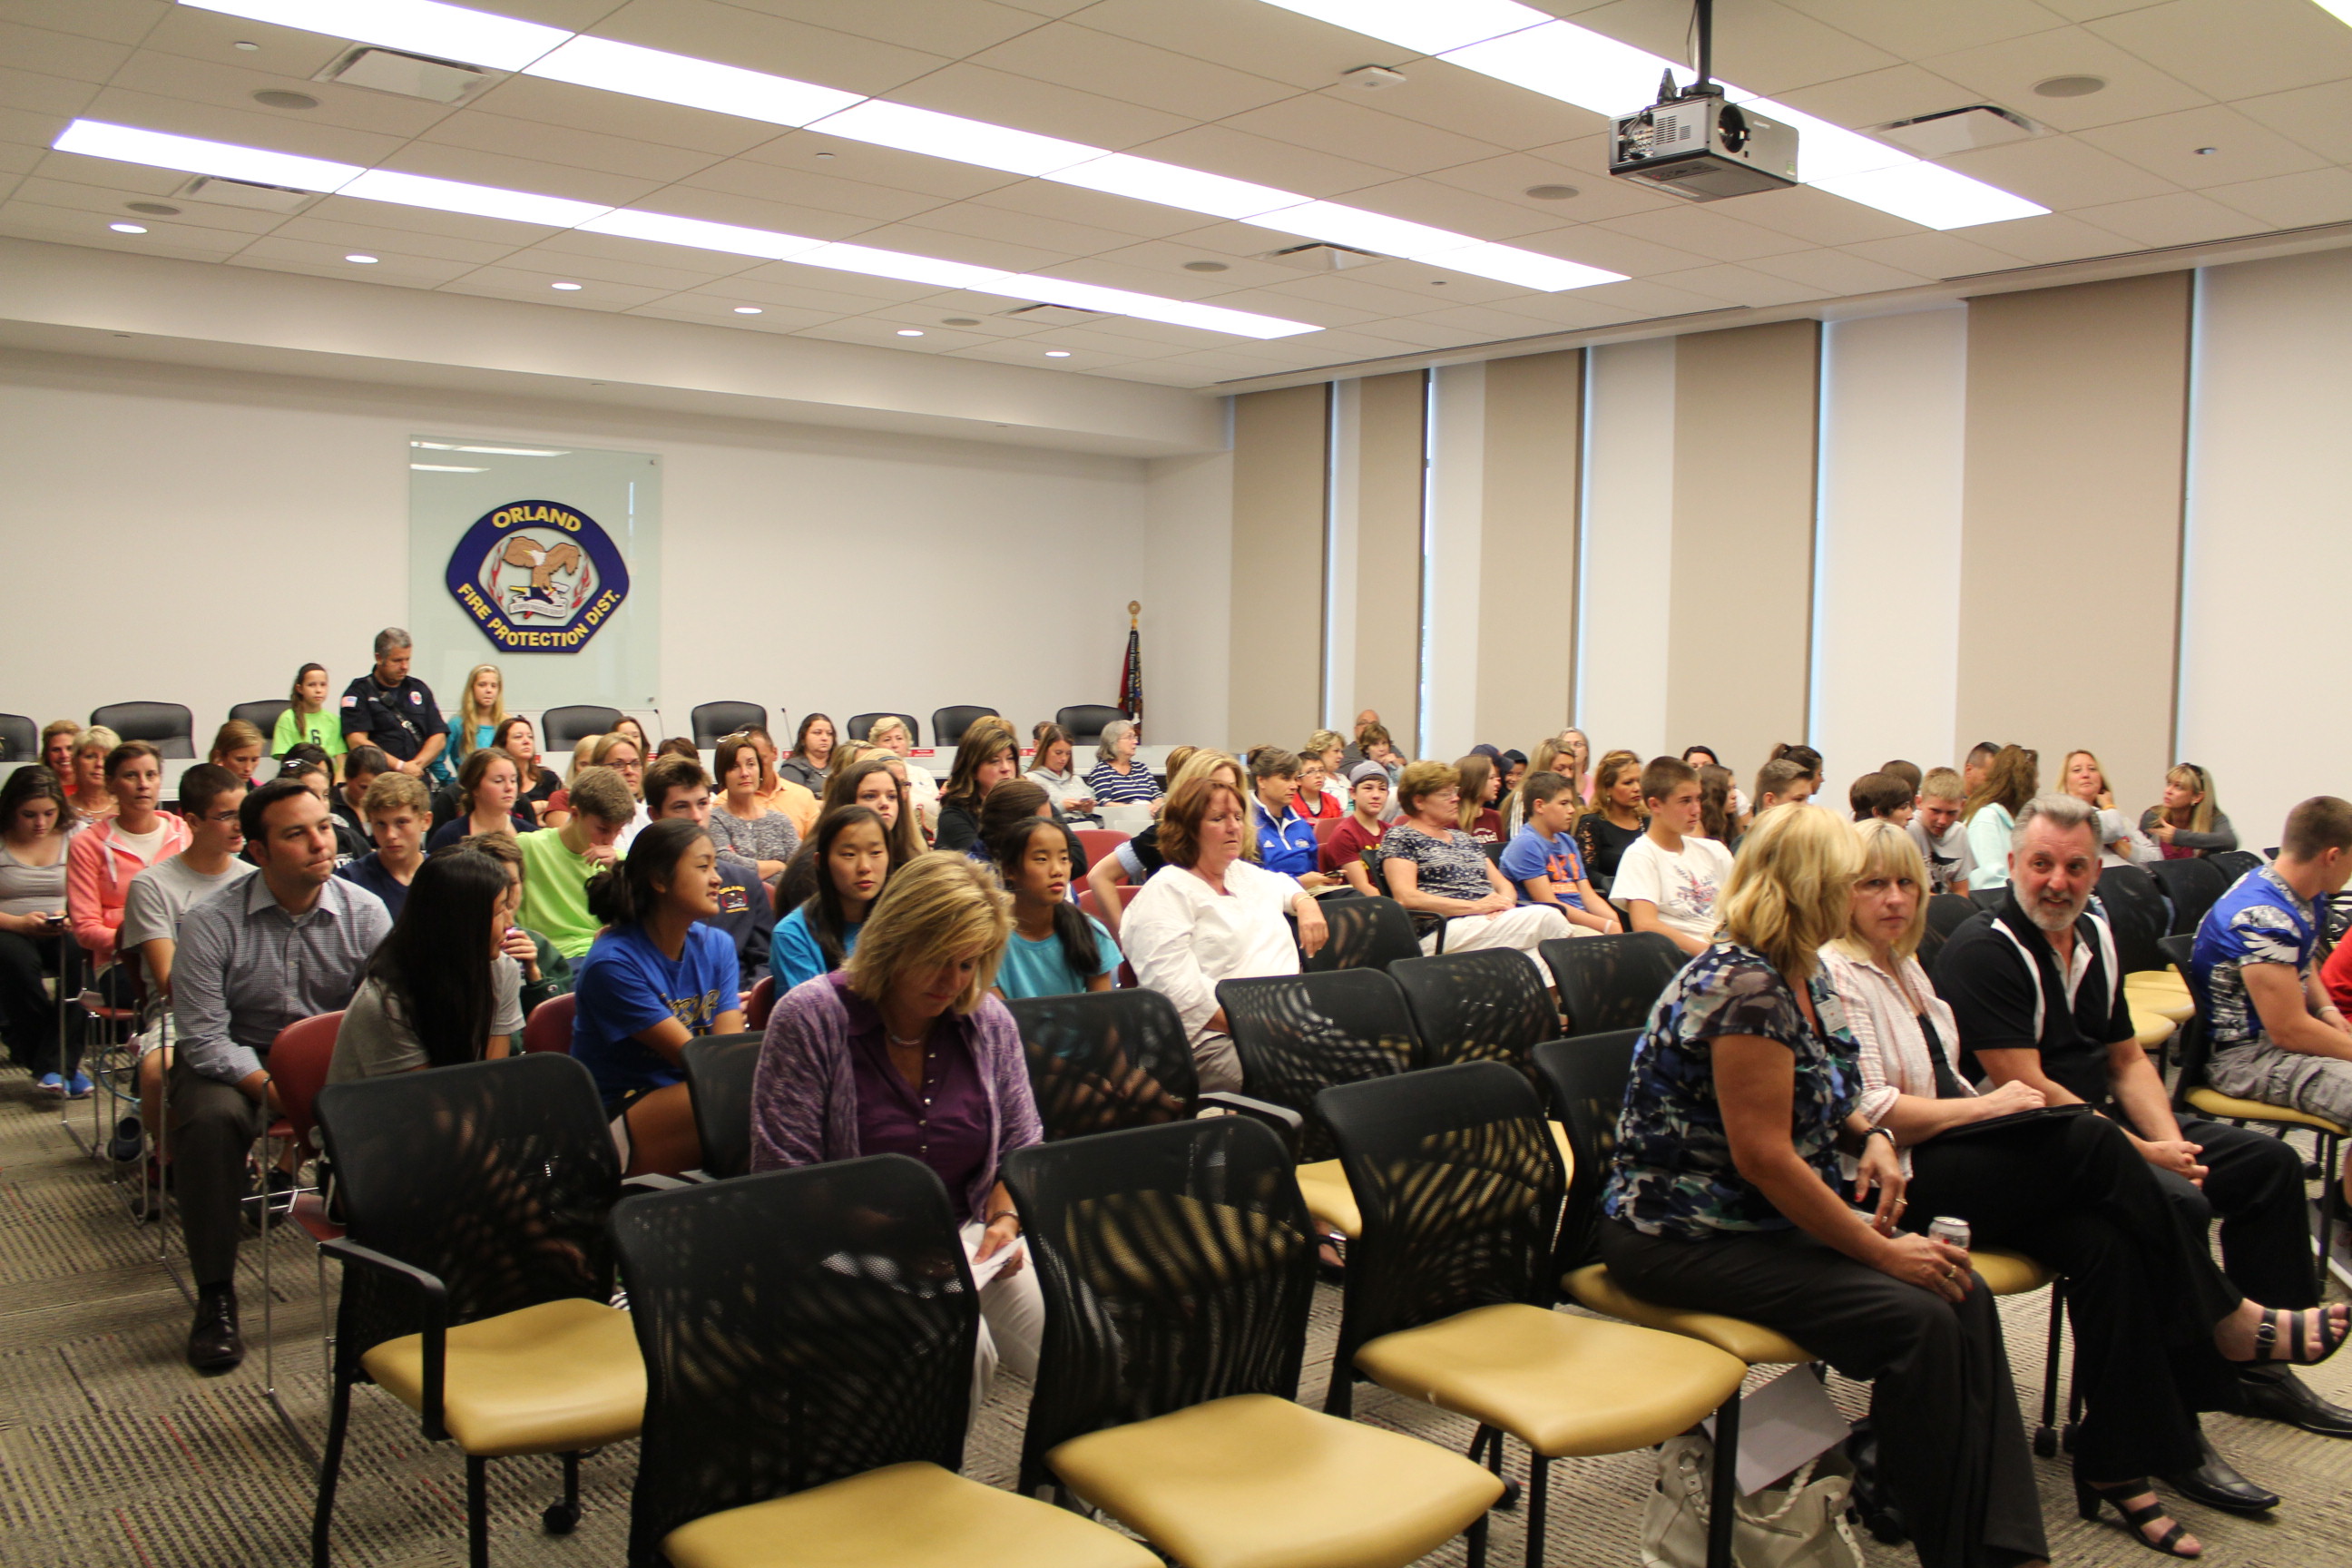 More than 100 parents and their children attended a public meeting hosted by the OFPD on increasing heroin use and substance abuse challenges Tuesday July 15, 2014.